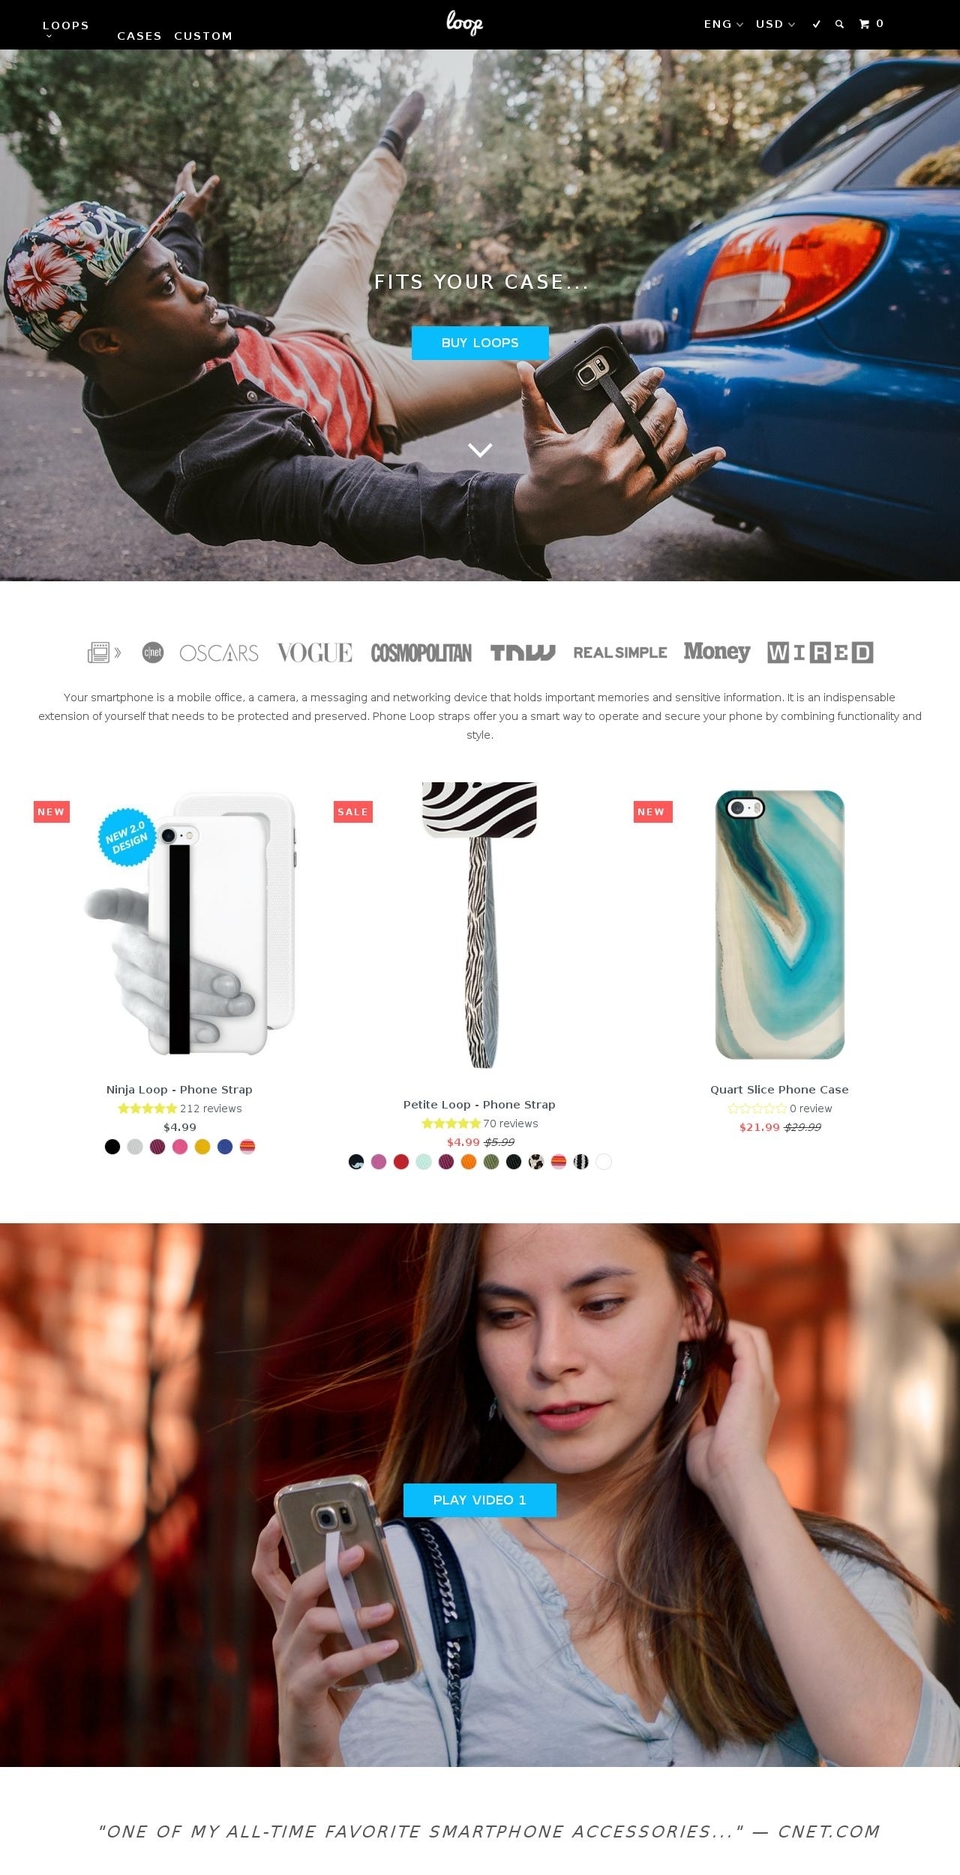 Streamline Shopify theme site example phoneloops.com